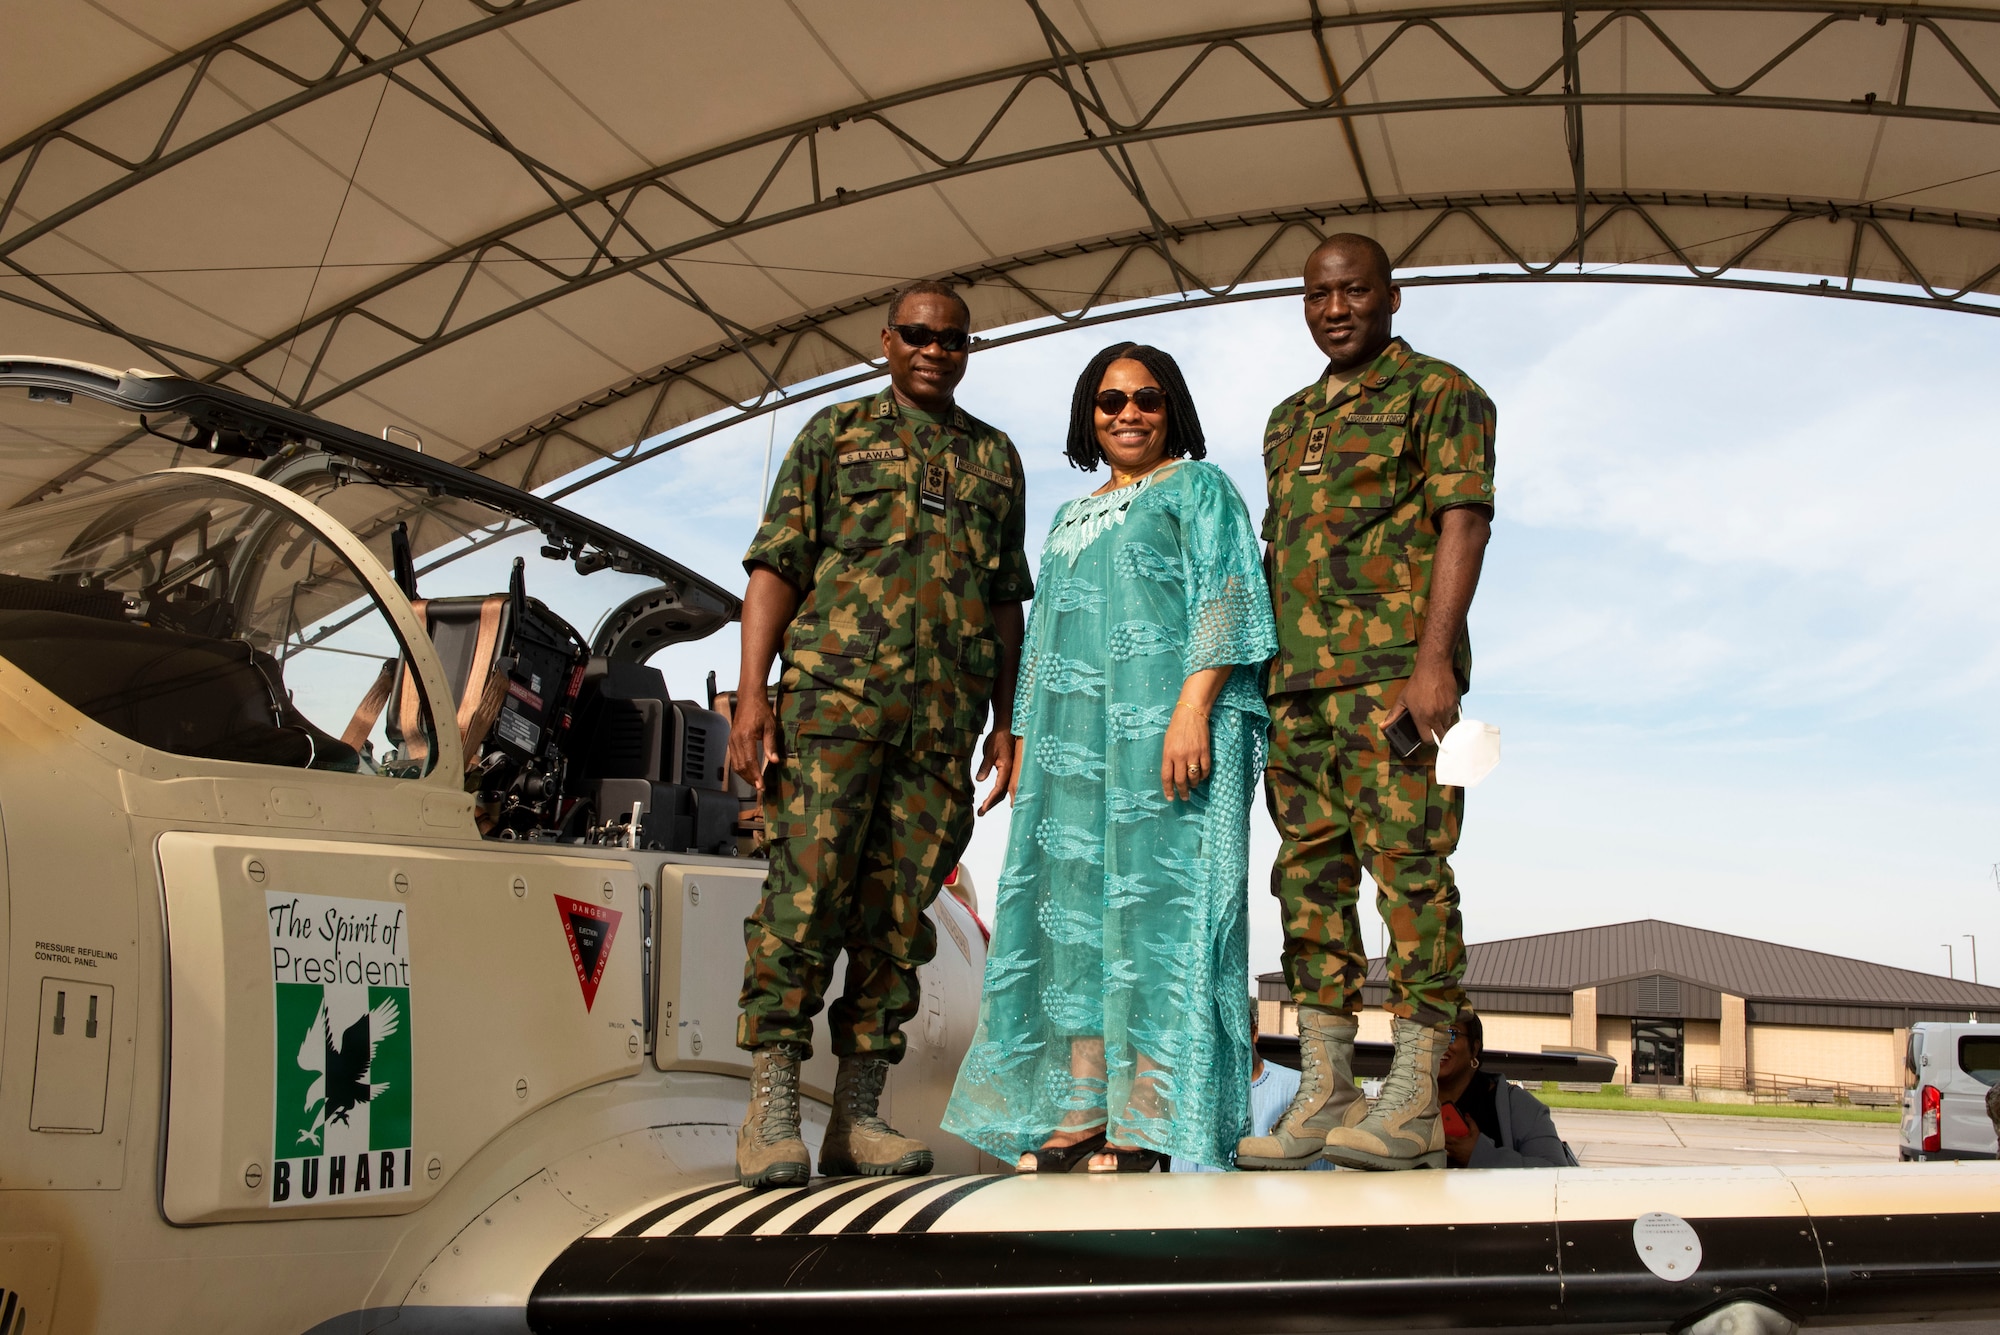 Sule Baba Lawal, Nigerian Air Vice-Marshal, right; Uzoma Elizabeth Emenike, Nigerian Ambassador, center; and Jibrin Usman, Nigerian Air Commodore, pose for a photo on the wing of an A-29 Super Tucano aircraft at Moody Air Force Base, Georgia, Sept. 14, 2021. The ambassador came to the 81st FS to meet and send off the pilots who are transporting the A-29 Super Tucano aircraft from Moody AFB to Kainji Air Base, Nigeria. (U.S. Air Force photo by Airman 1st Class Megan Estrada)